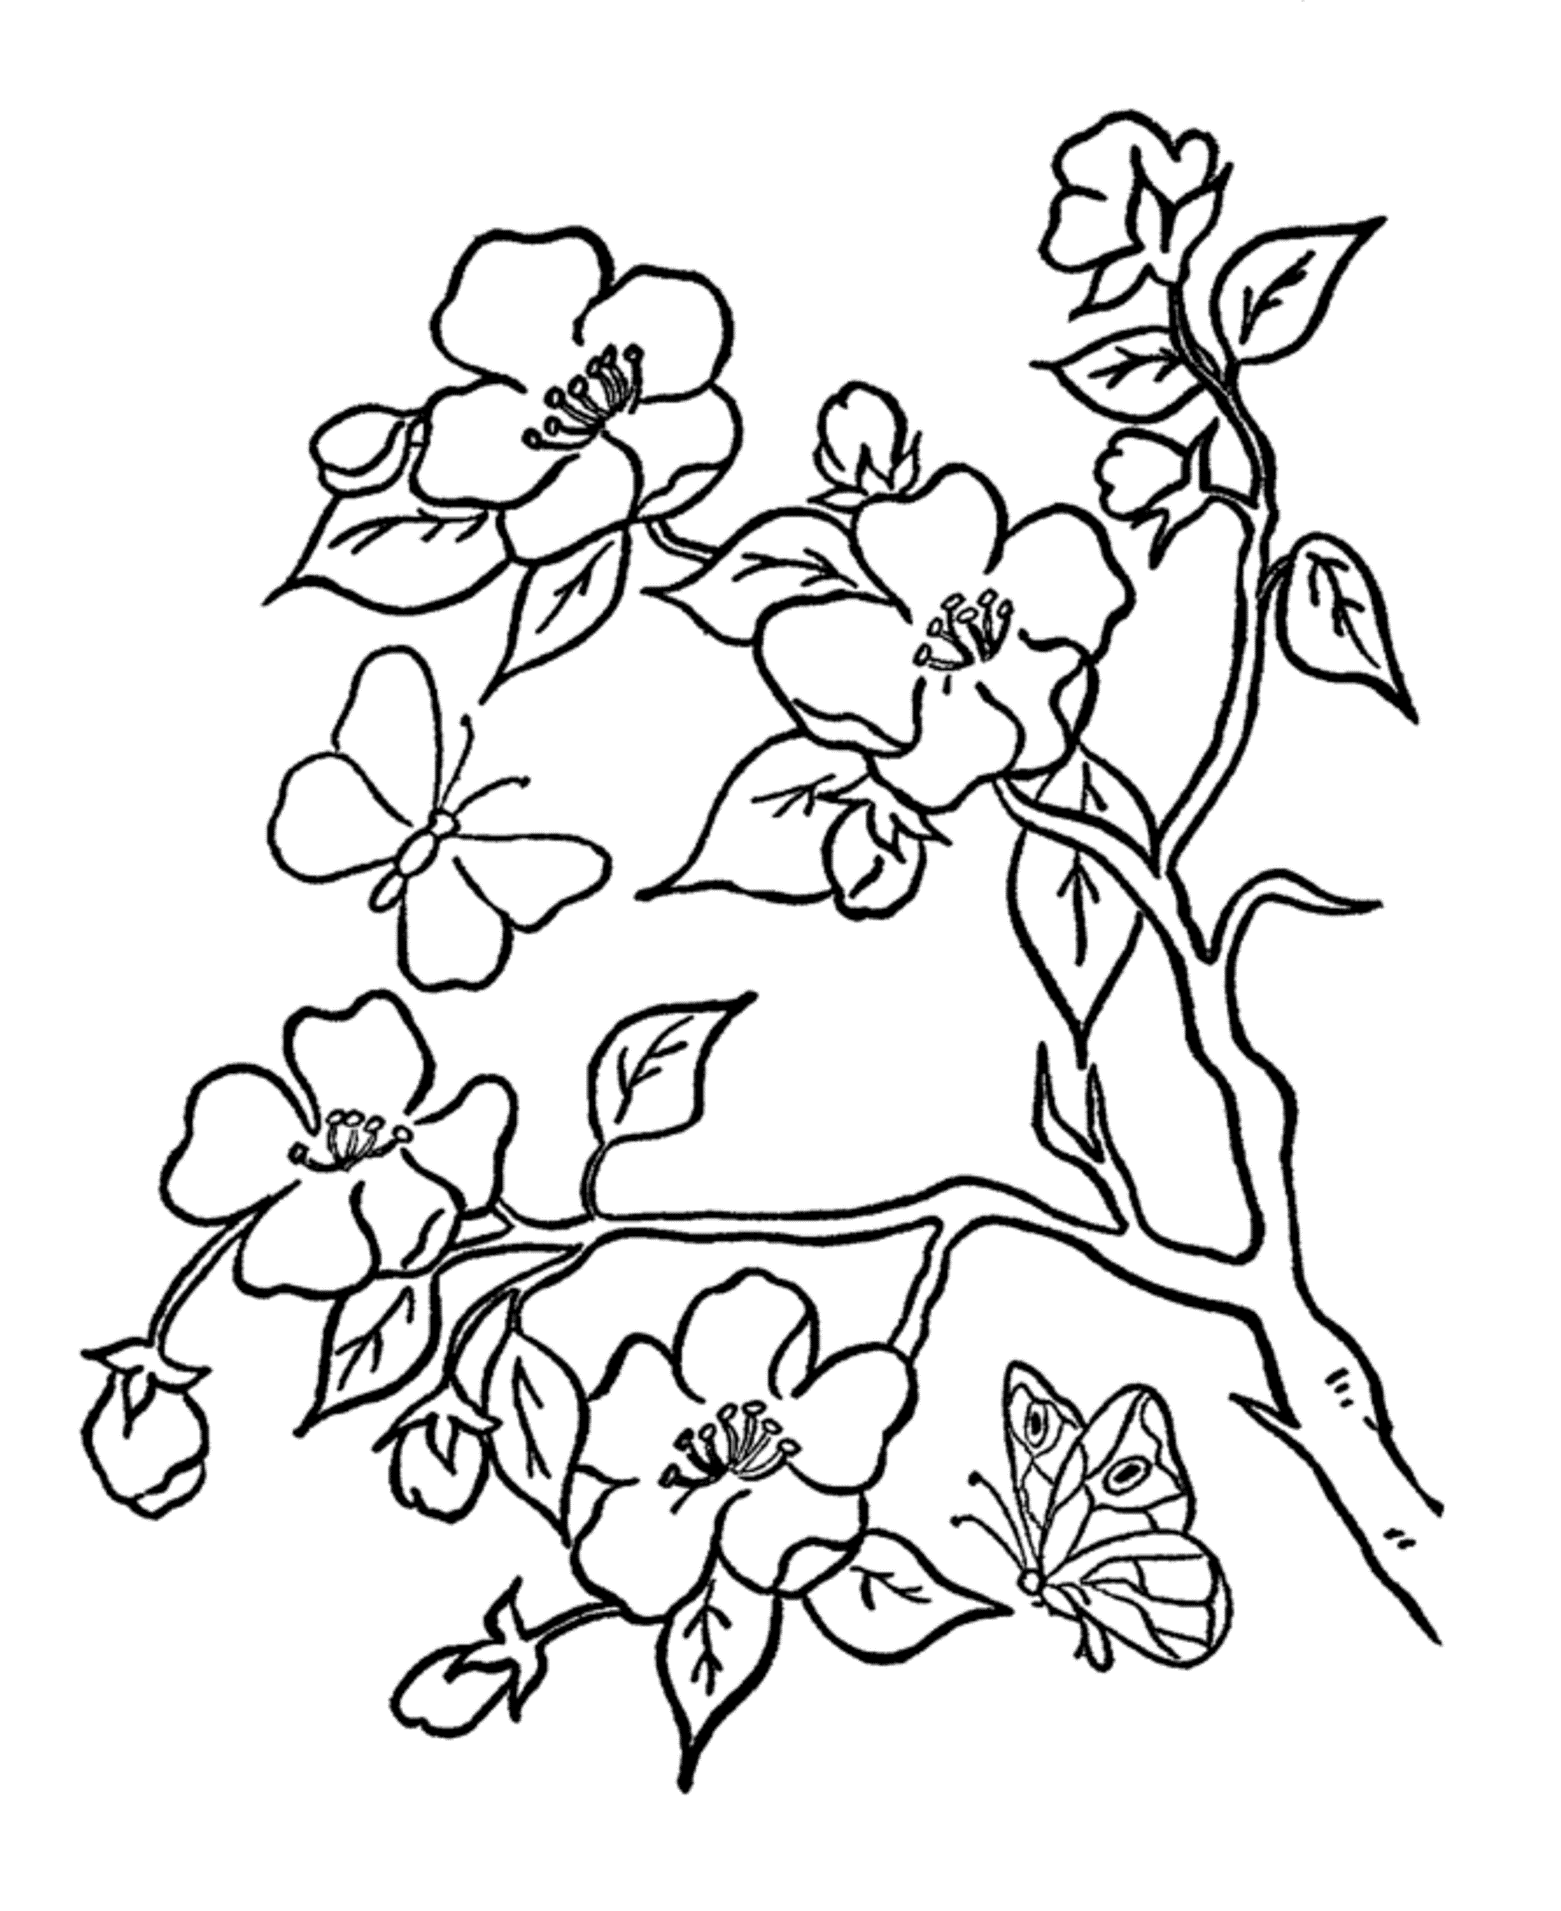 Flowers Coloring Pages With Butterfly | Flower Coloring pages of ...